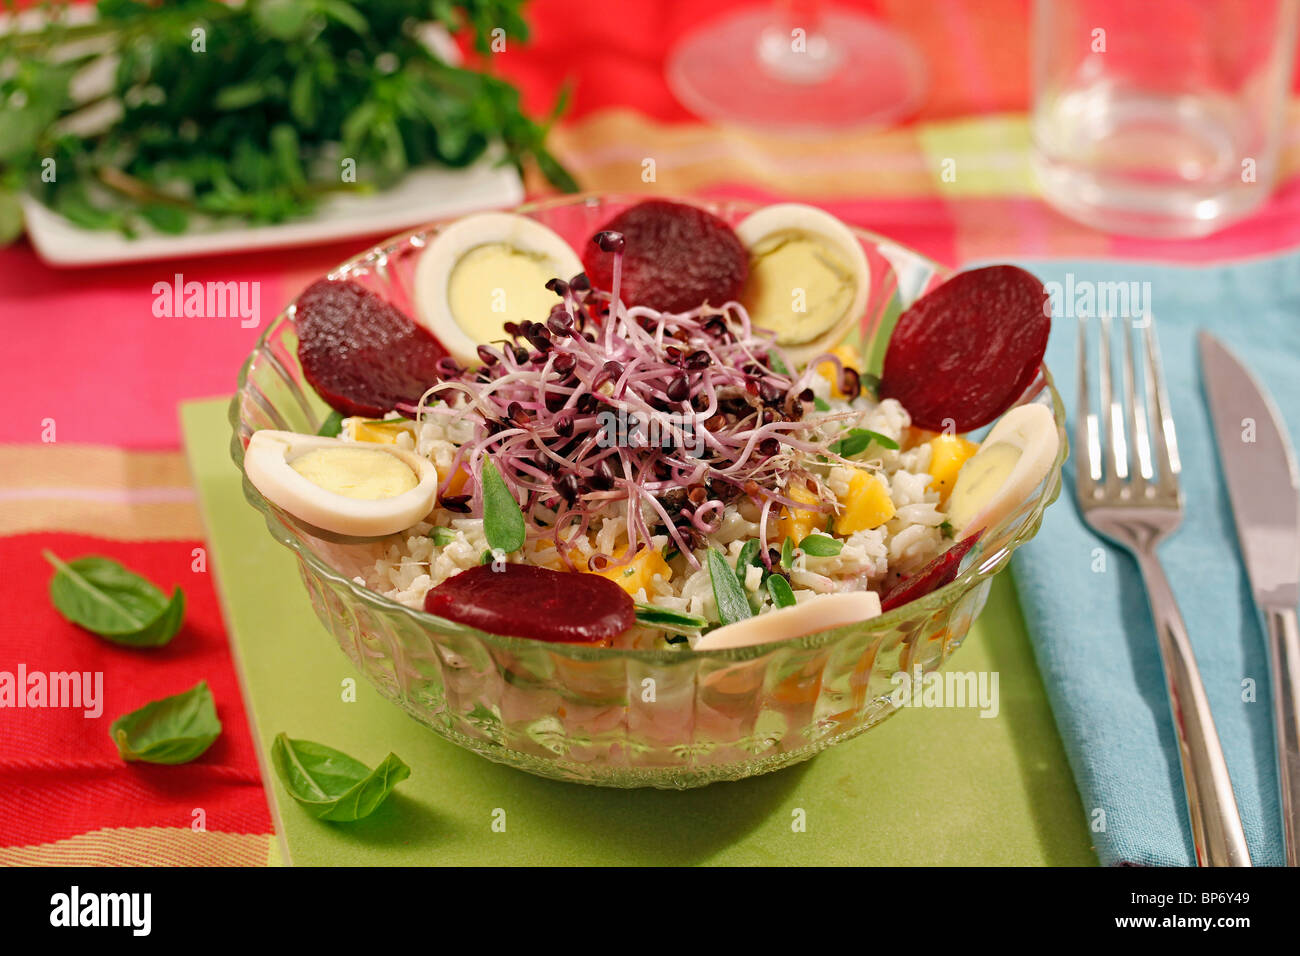 Rice salad with sprouts. Recipe available. Stock Photo